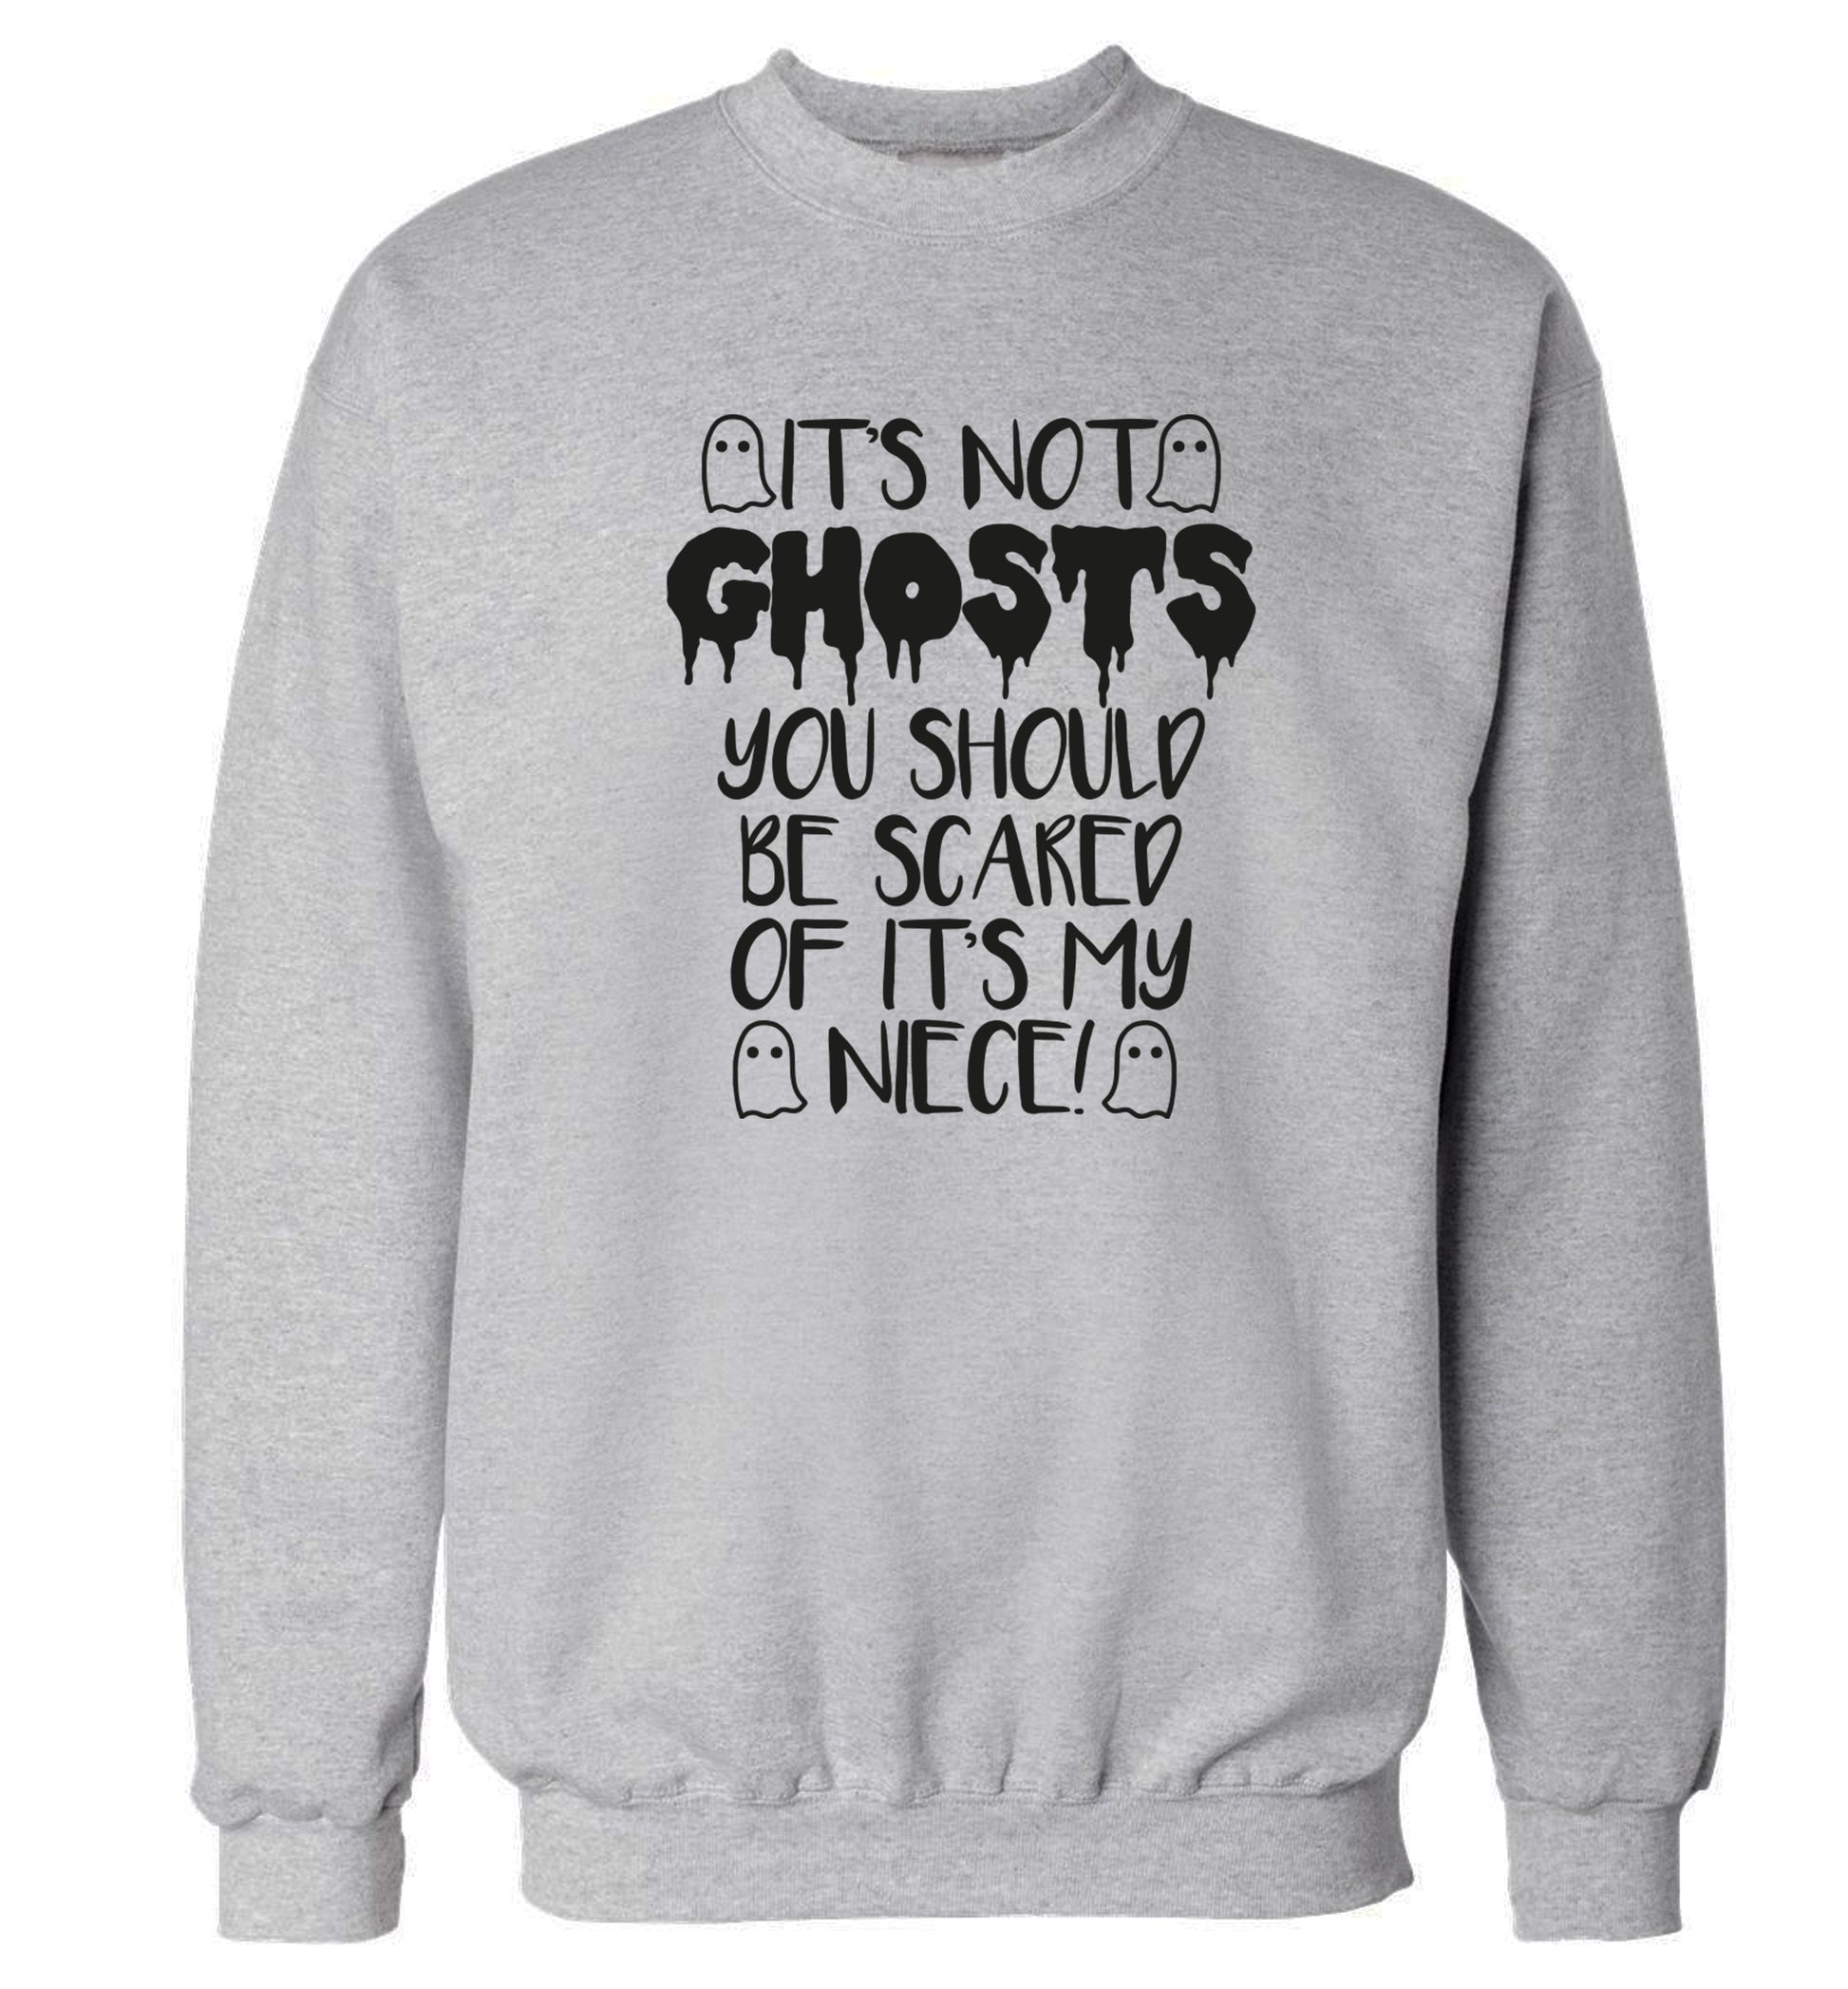 It's not ghosts you should be scared of it's my niece! Adult's unisex grey Sweater 2XL